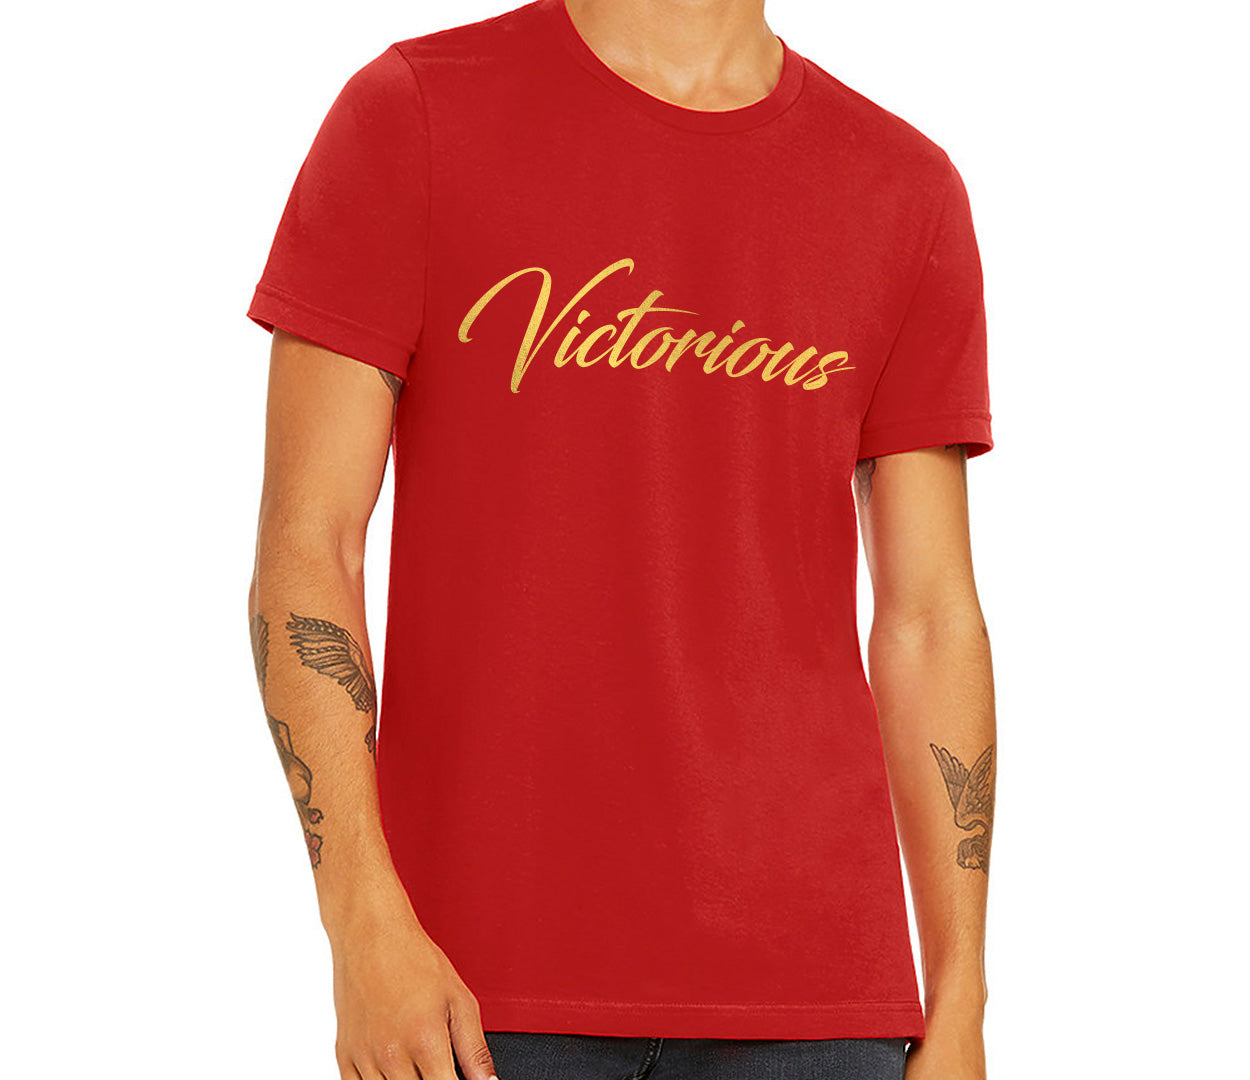 The Victorious Tee